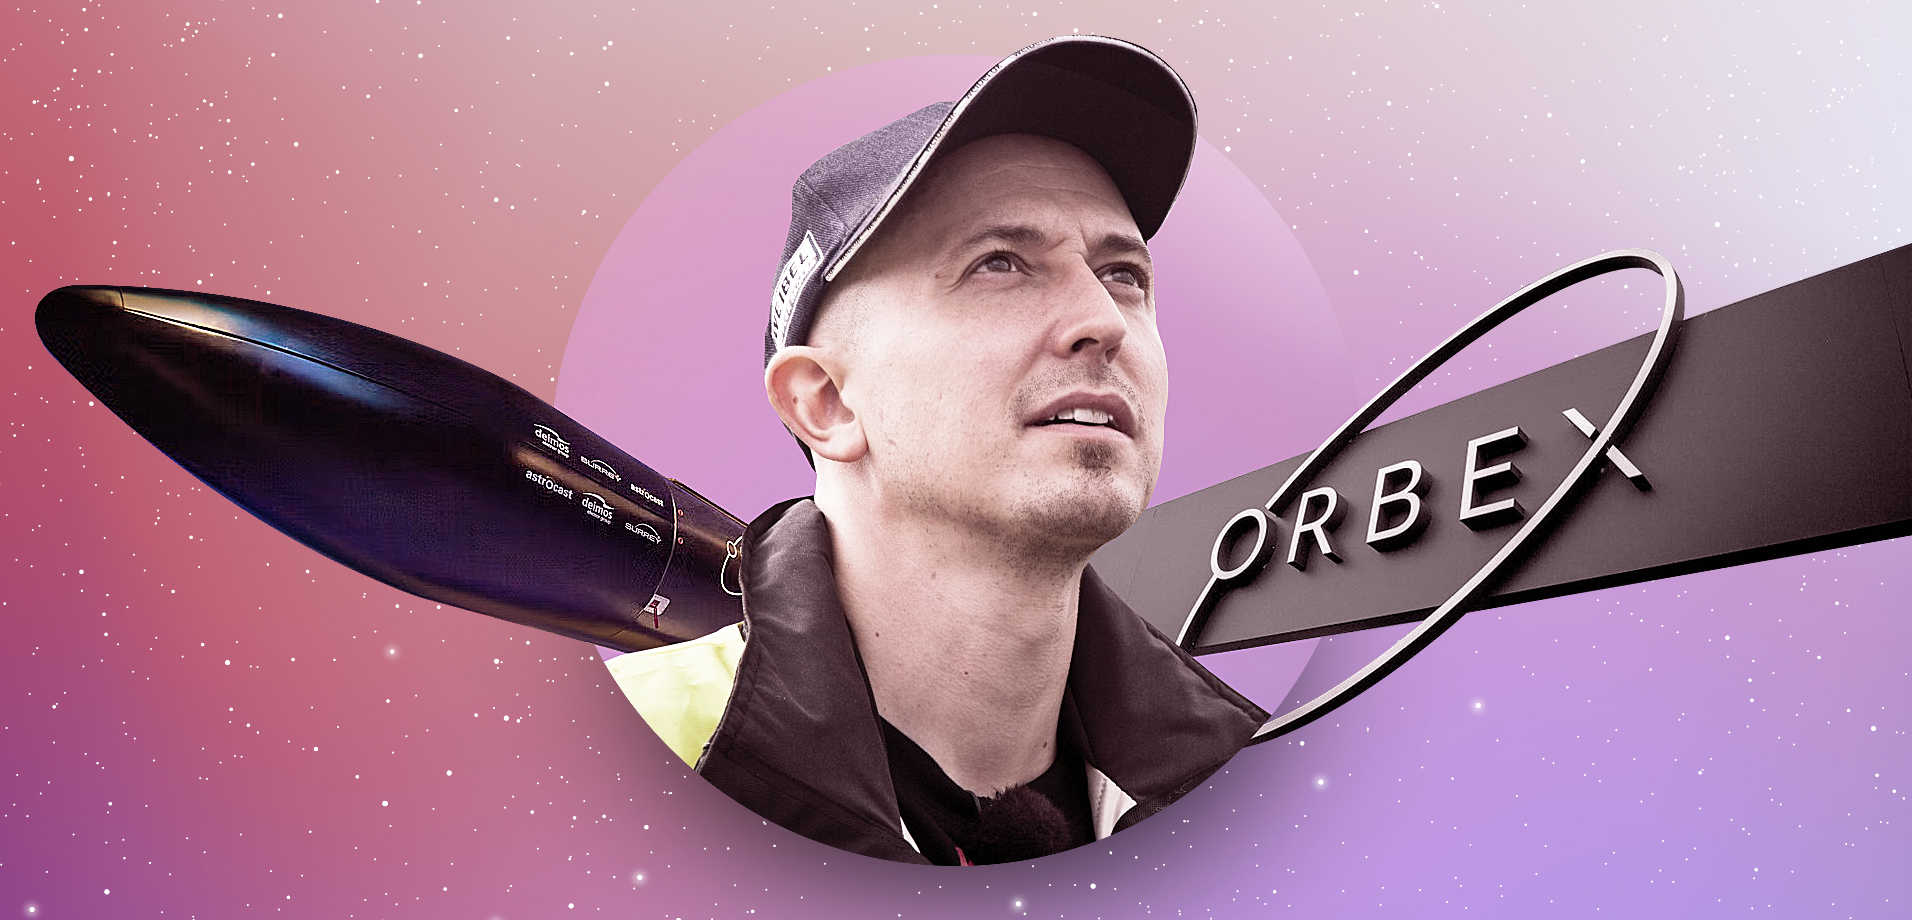 People in Space: Kristian Von Bengtson, the man behind Orbex